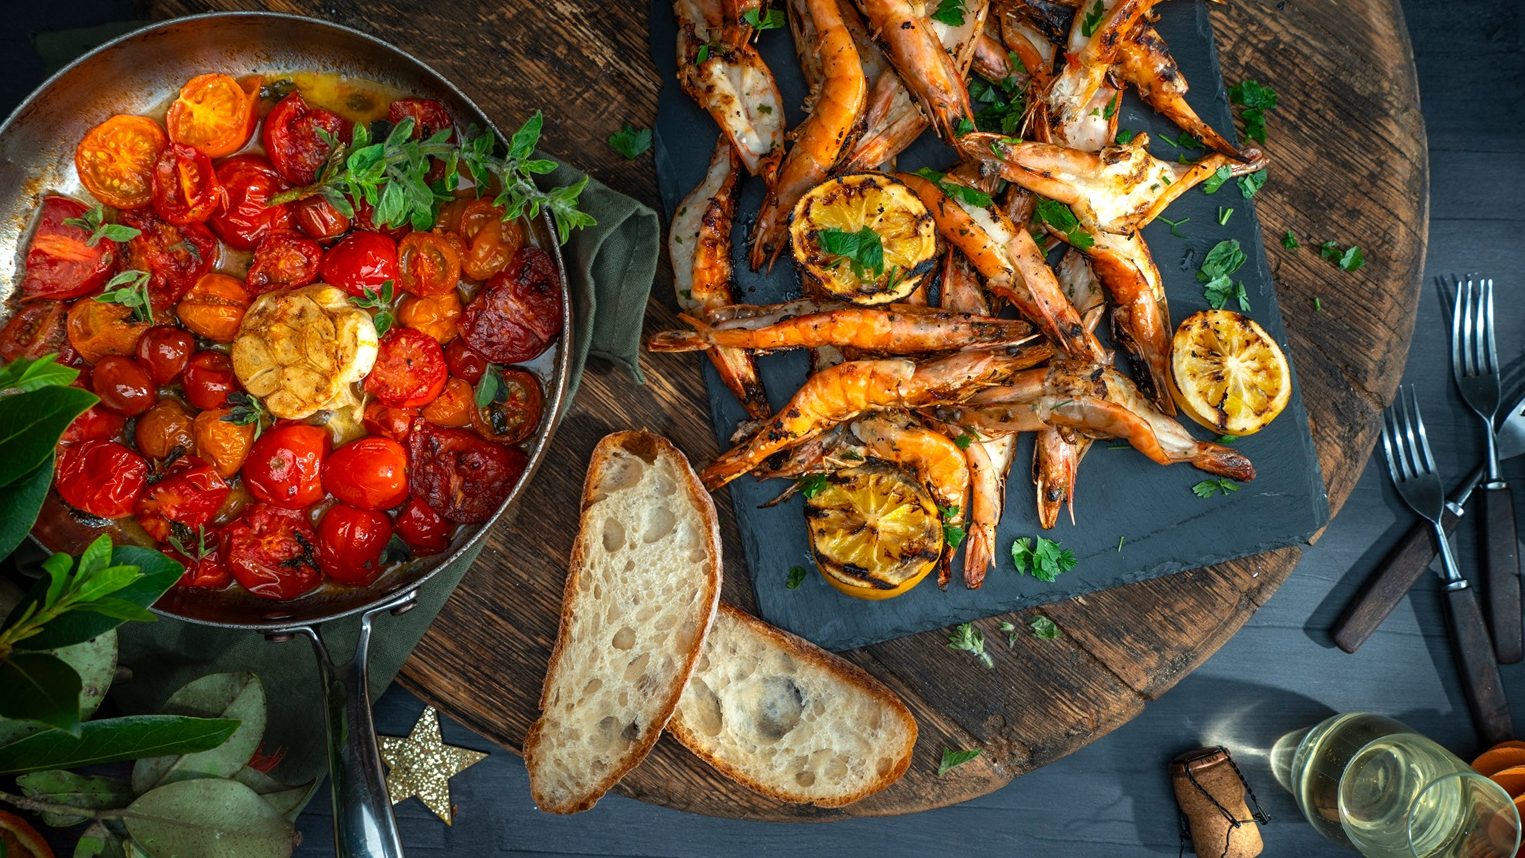 A plate of cooked large prawns and a pan of tomatoes with slices of bread and Christmas decorations.